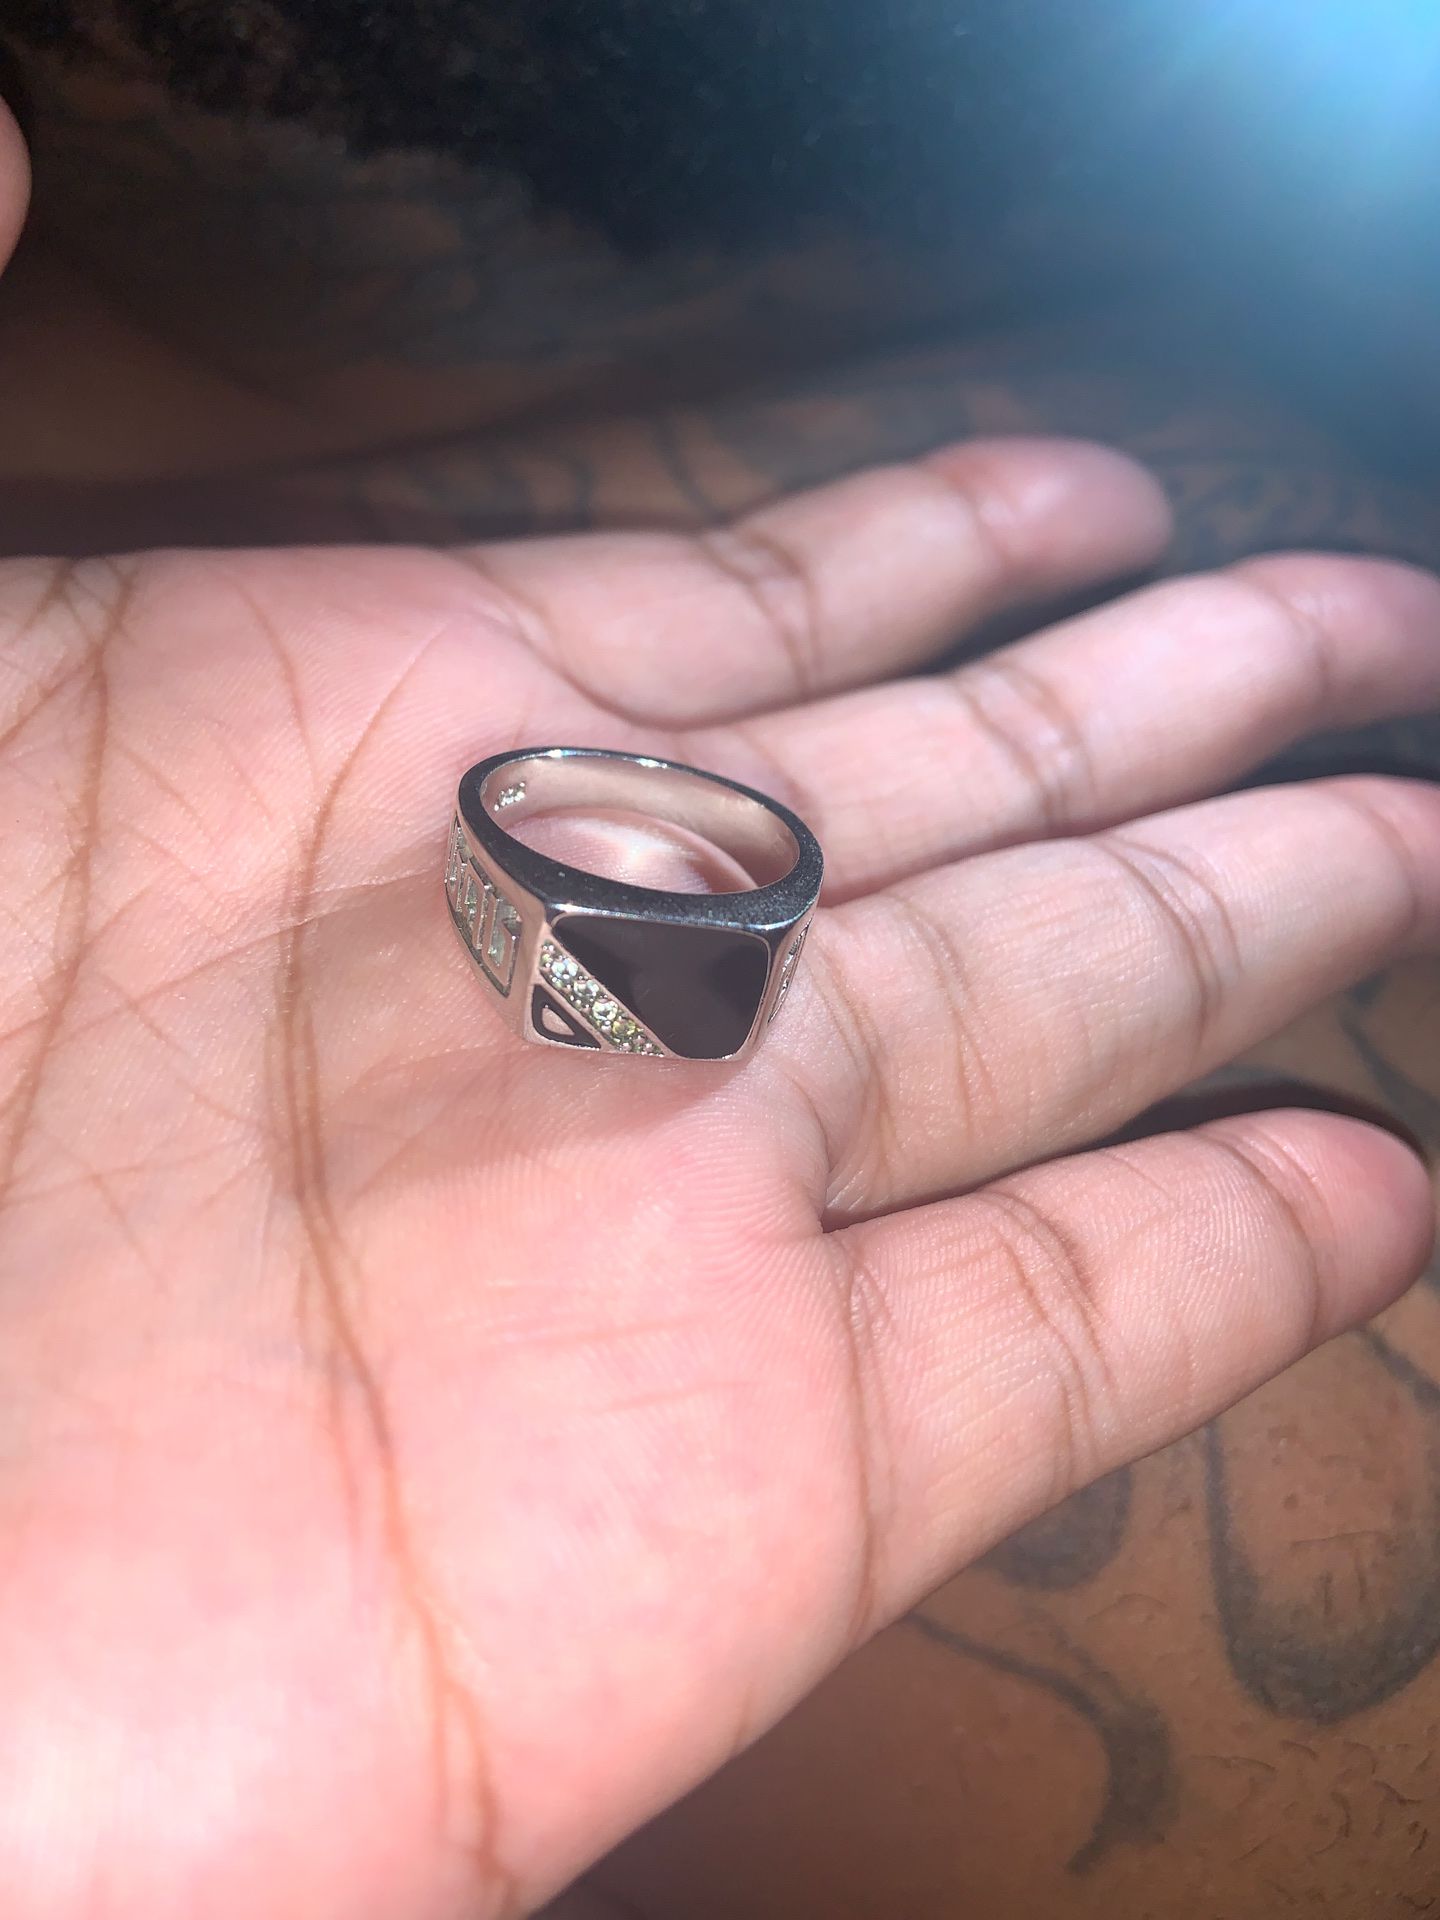 Size 7 Male Wedding Ring